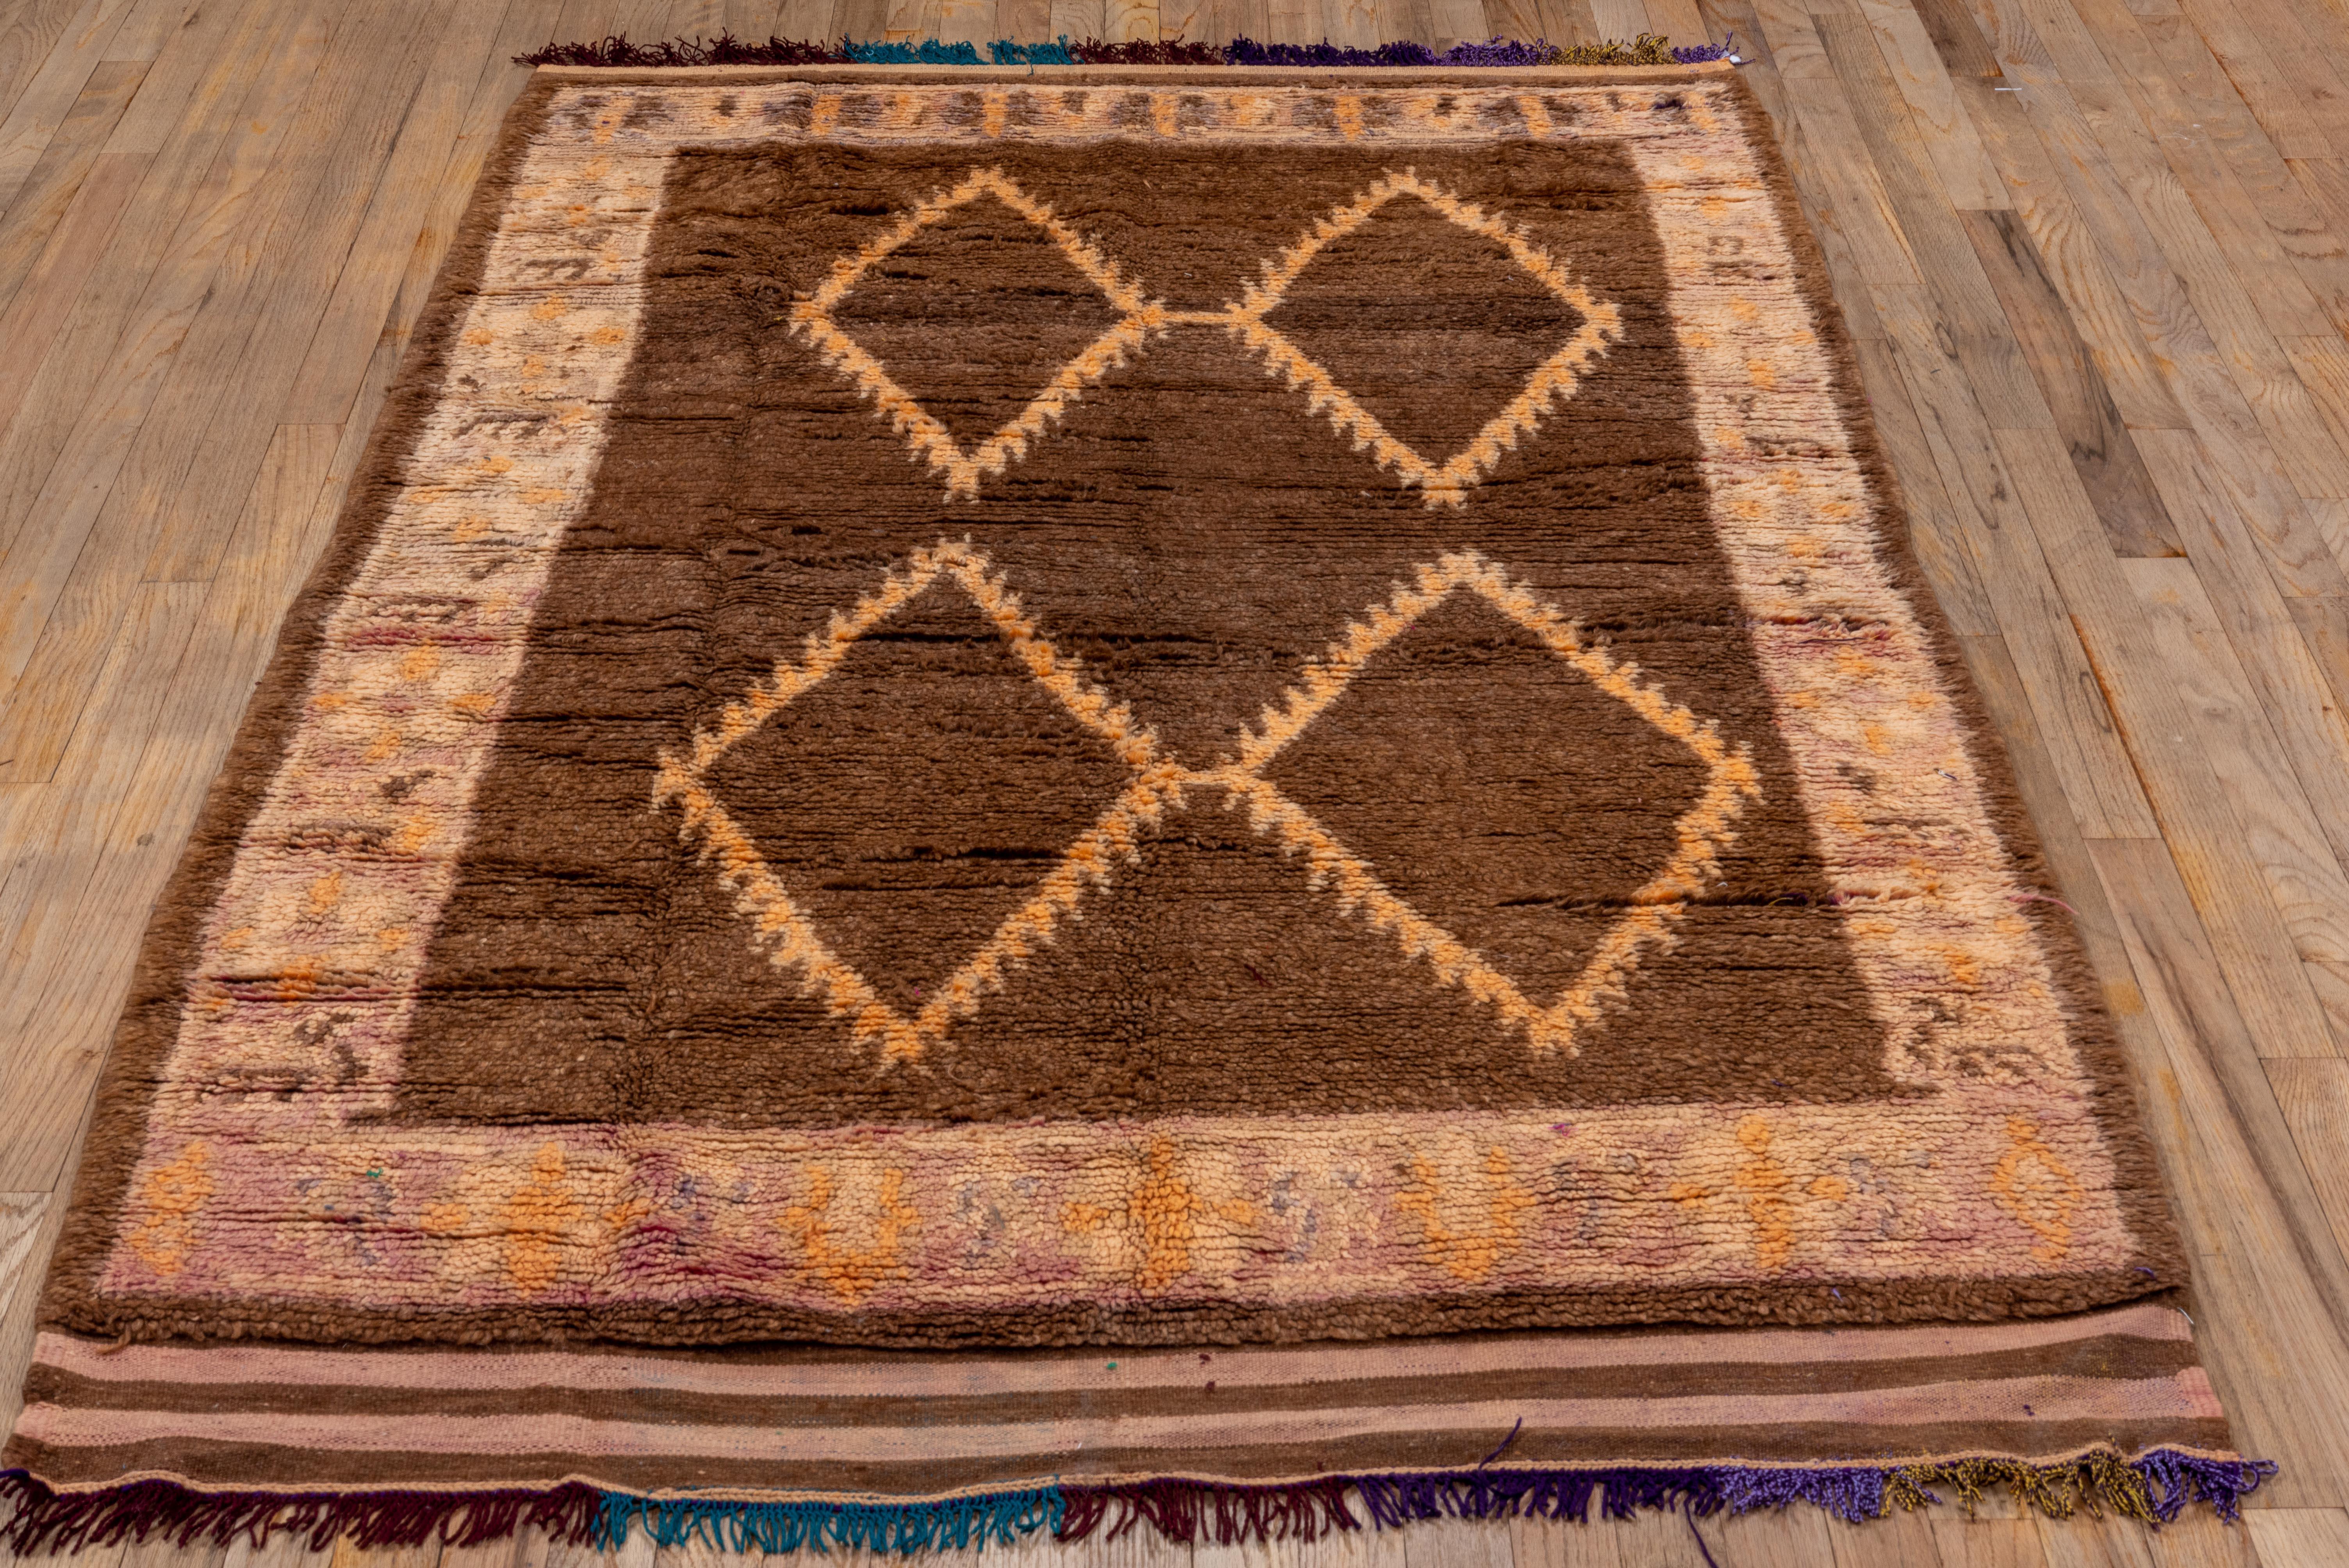 100% wool antique Moroccan rug with four bold diamonds making up the center field, color is brown gold and purple with a detailed inner border and tassels on both length sides  